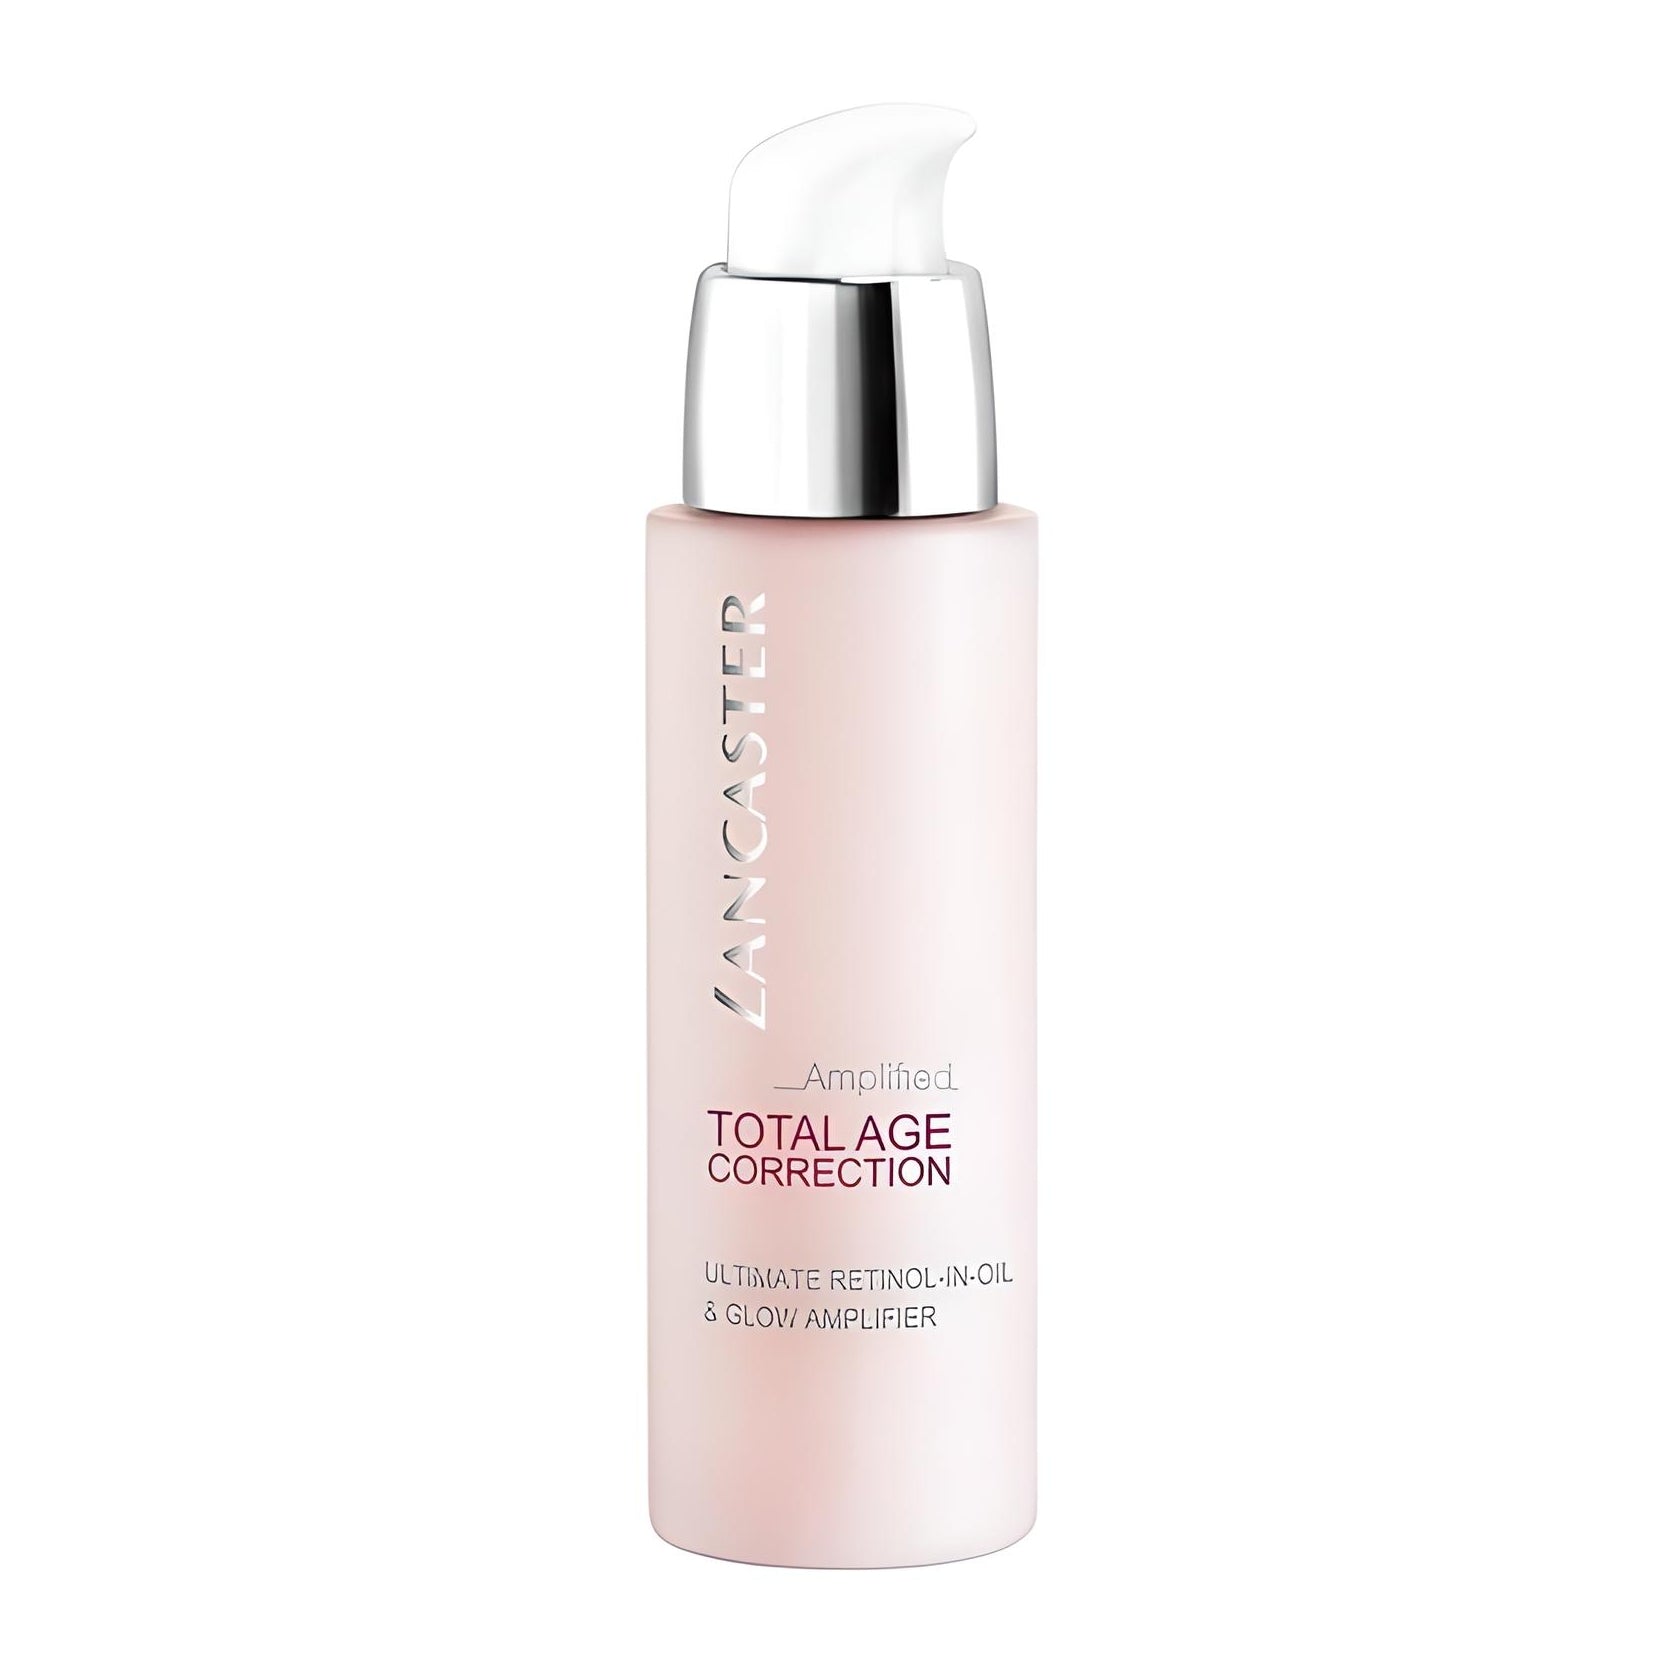 TOTAL AGE CORRECTION complete anti-aging retinol-in-oil